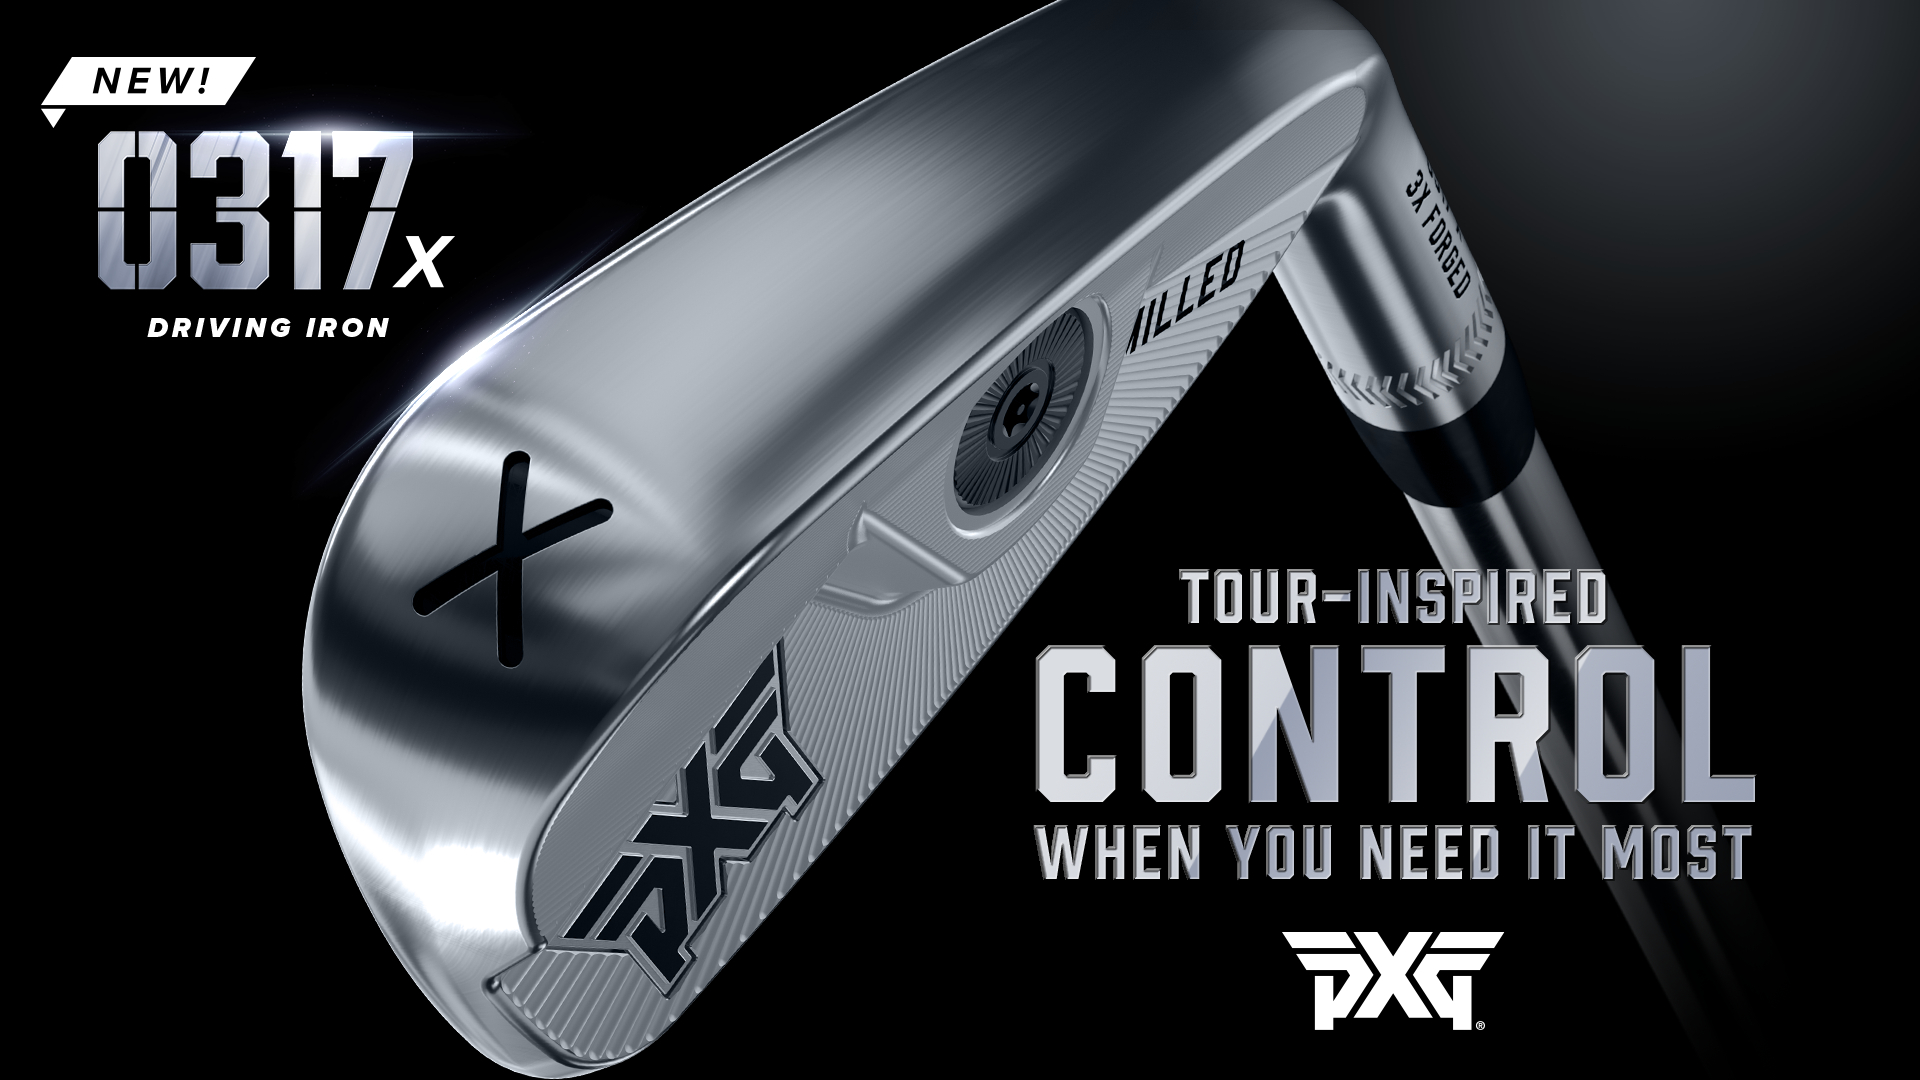 Triple forged and milled, the new PXG 0317 X Driving Iron is engineered with the elite player in mind.